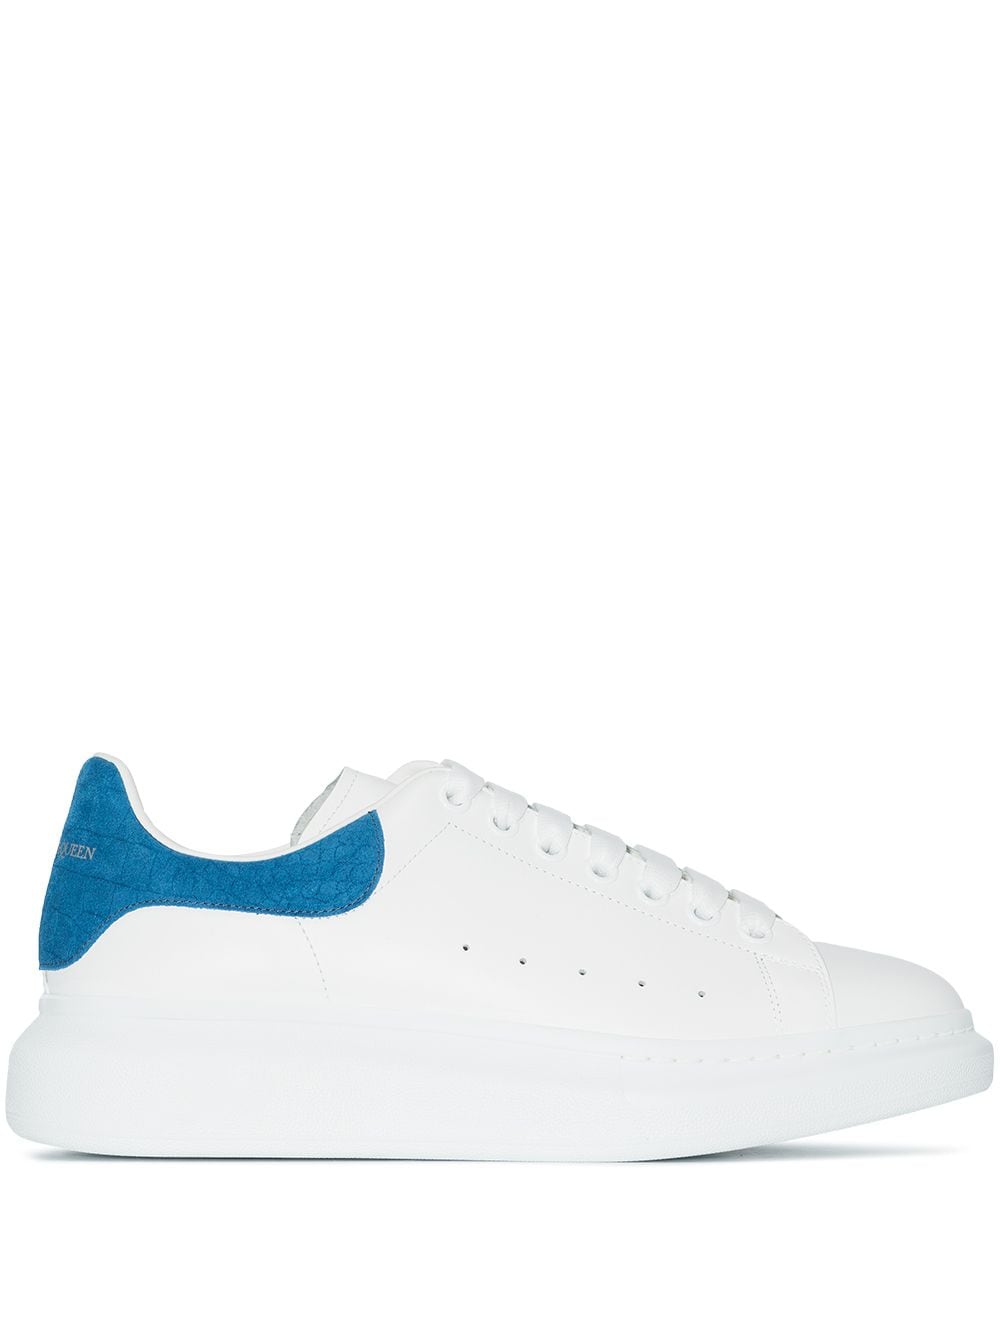 ALEXANDER MCQUEEN Oversized Croc Detail Sneakers White/Electric Blue